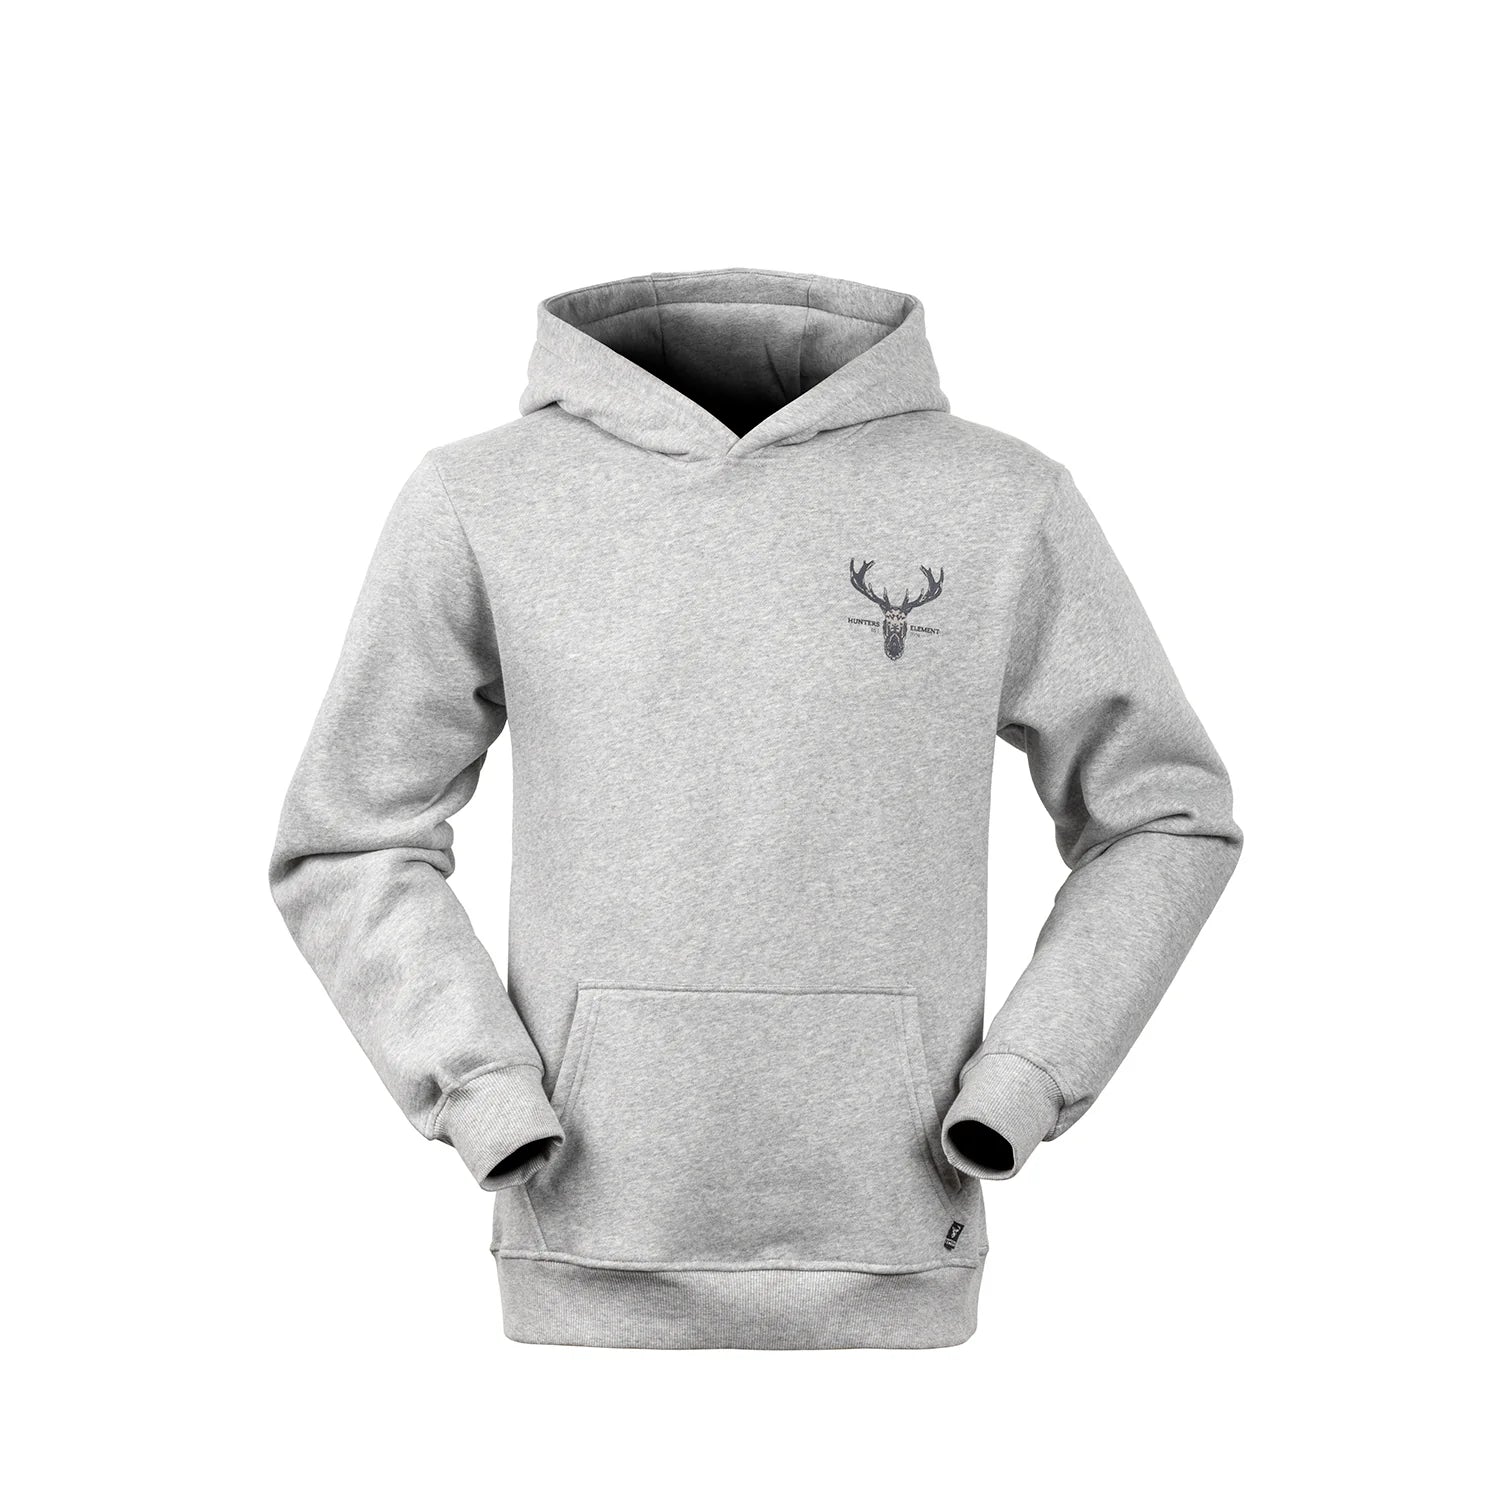 Hunters Element Alpha Stag Hoodie - S / GREY MARLE - Mansfield Hunting & Fishing - Products to prepare for Corona Virus